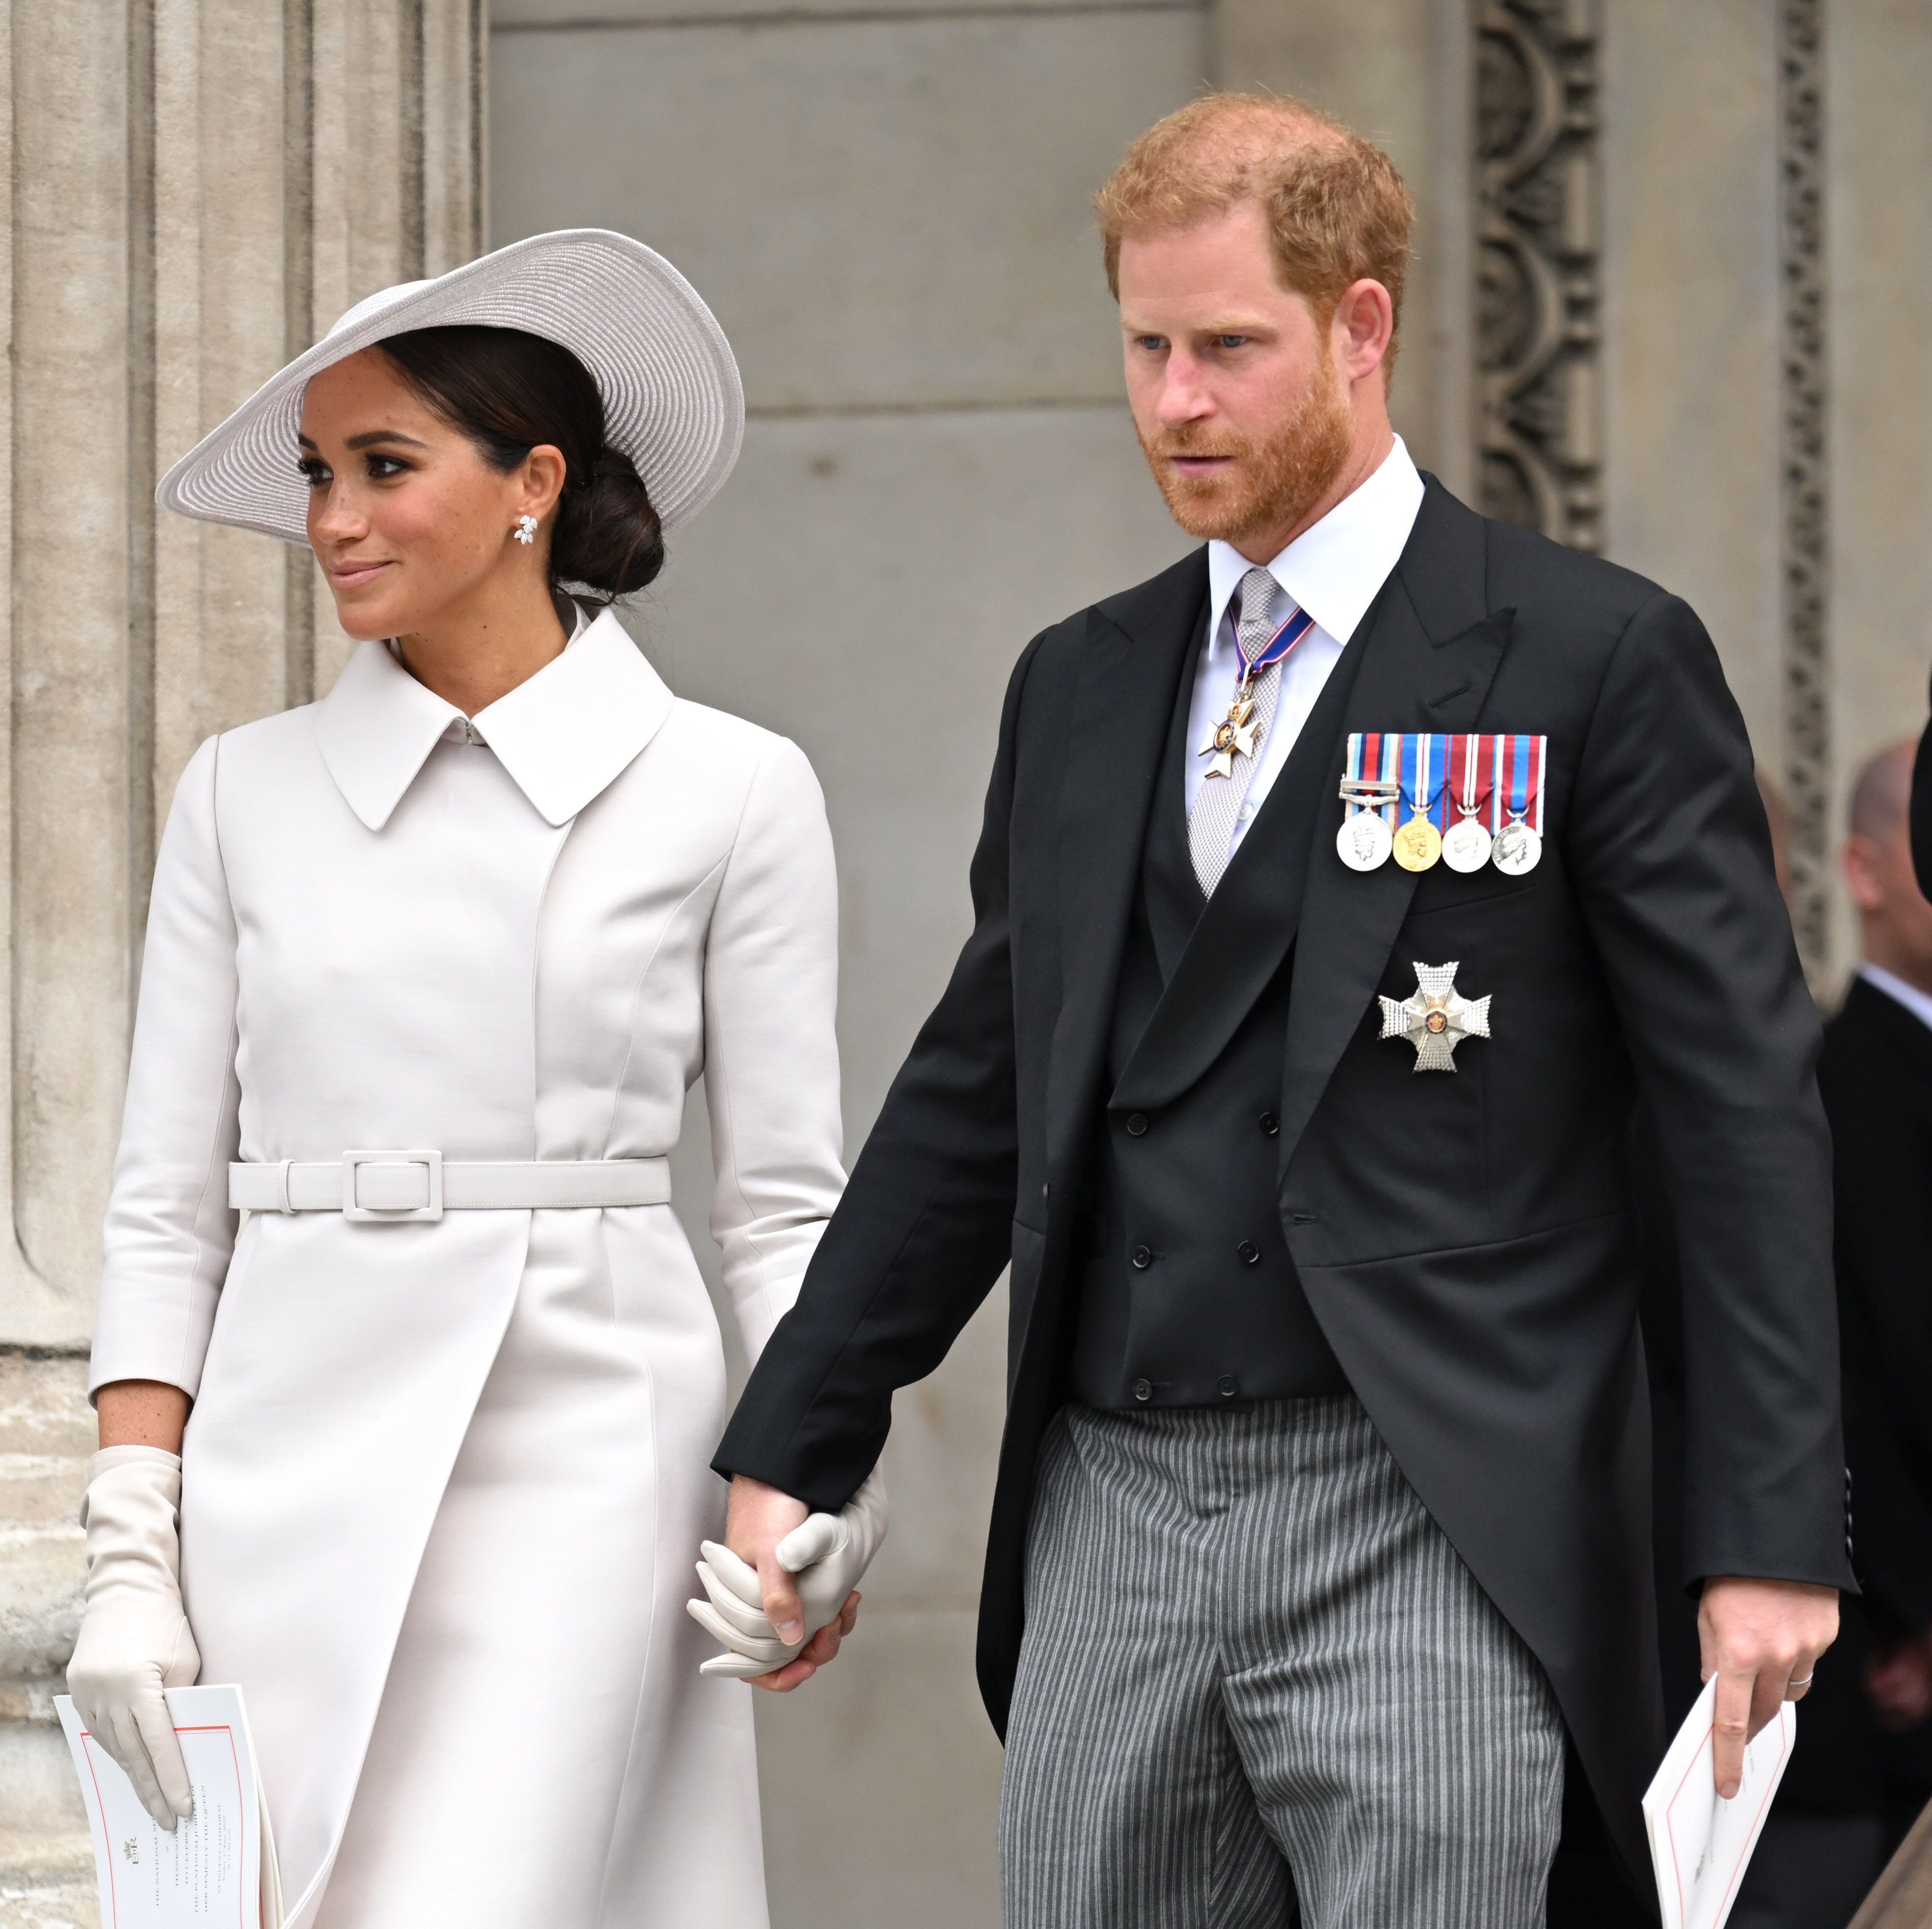 An Insider Spilled Why Meghan Markle and Prince Harry Only Attended 2 Jubilee Events